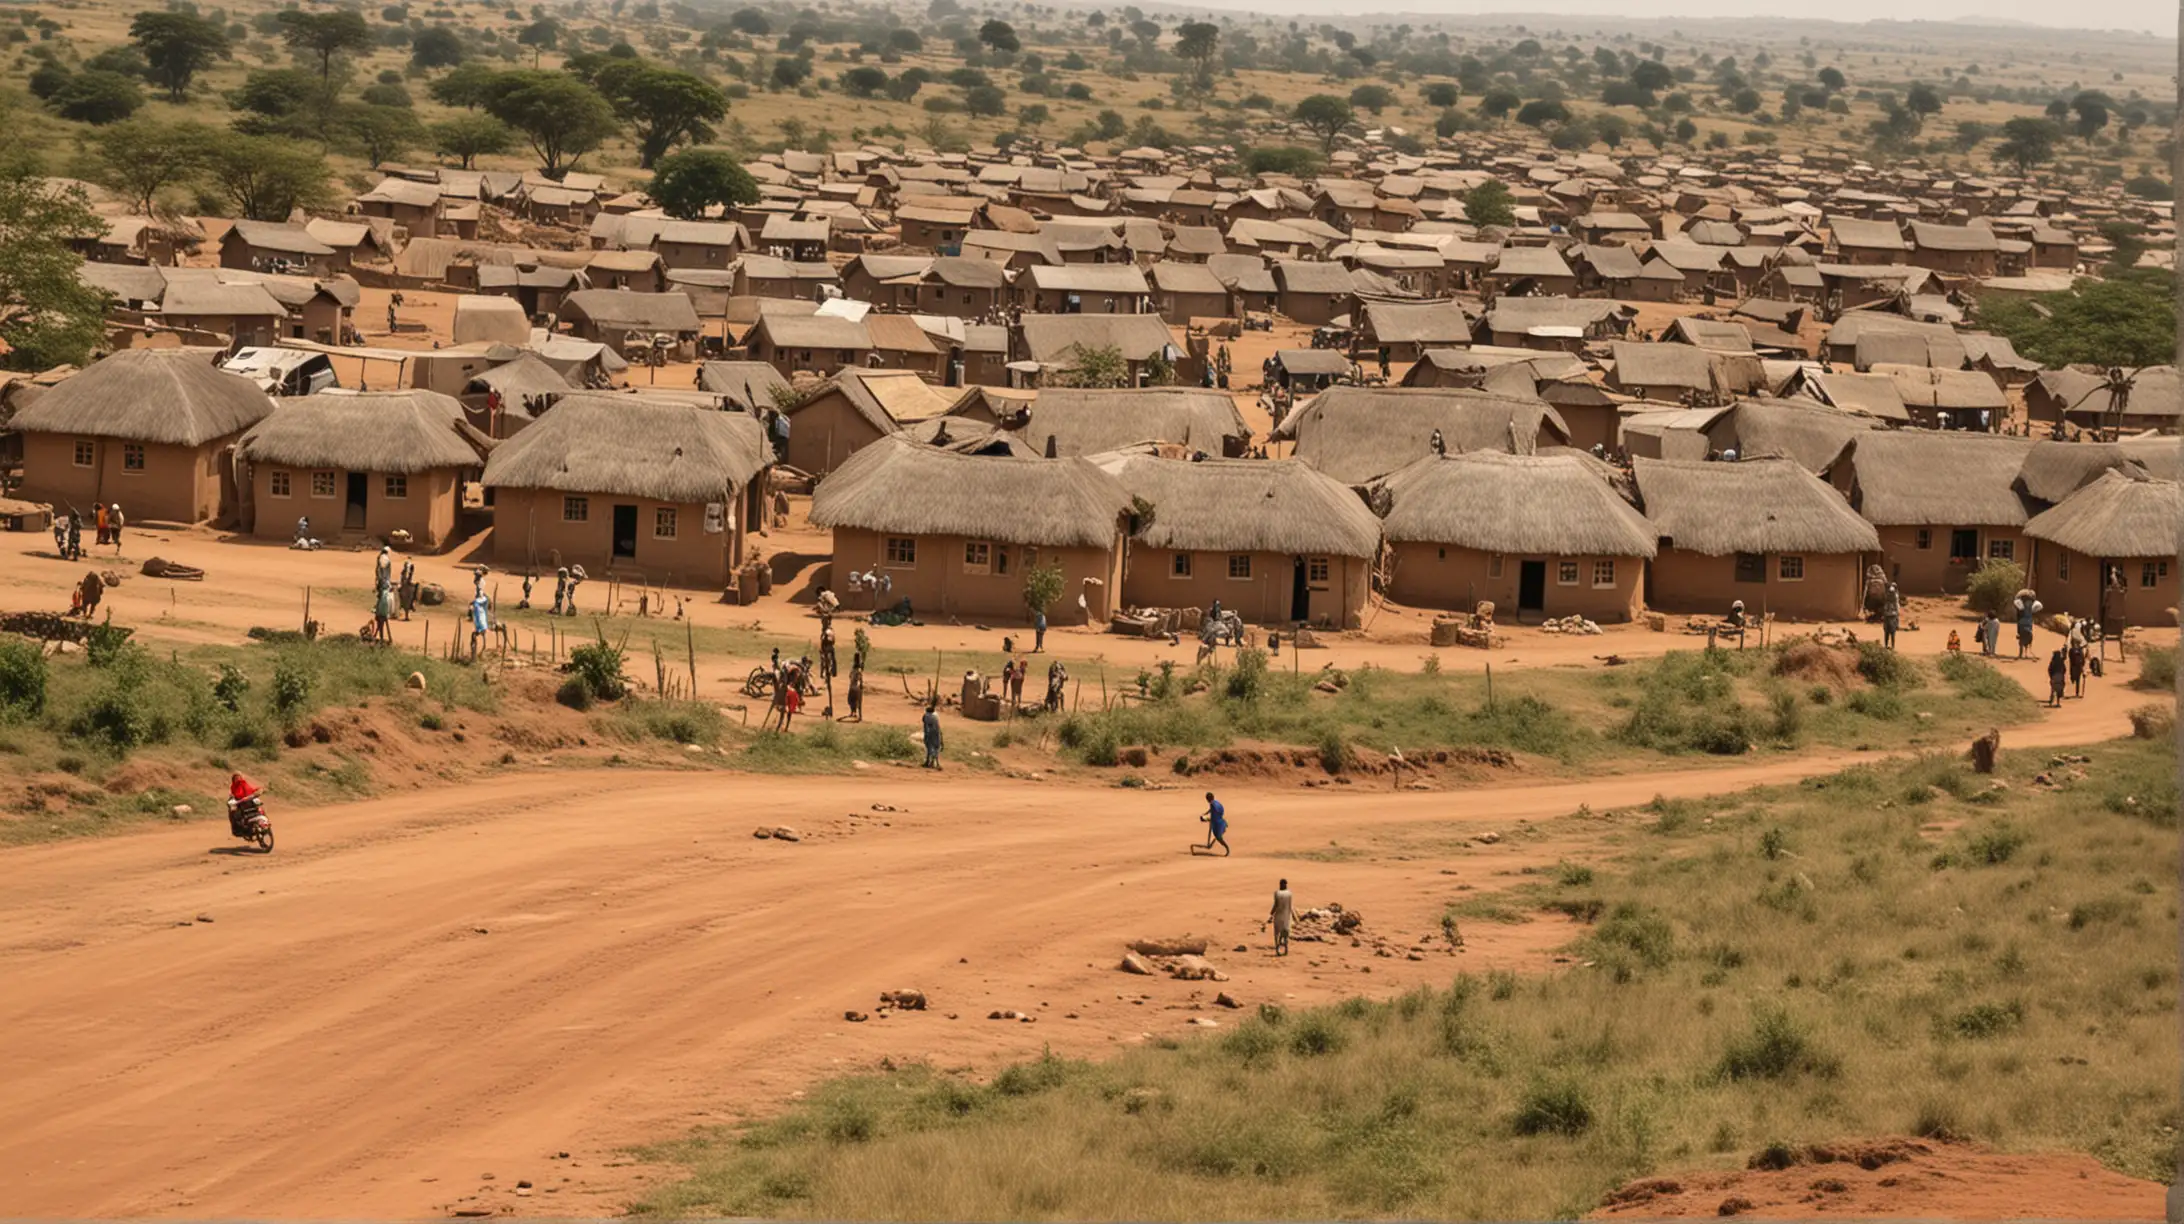 homes in africa, many